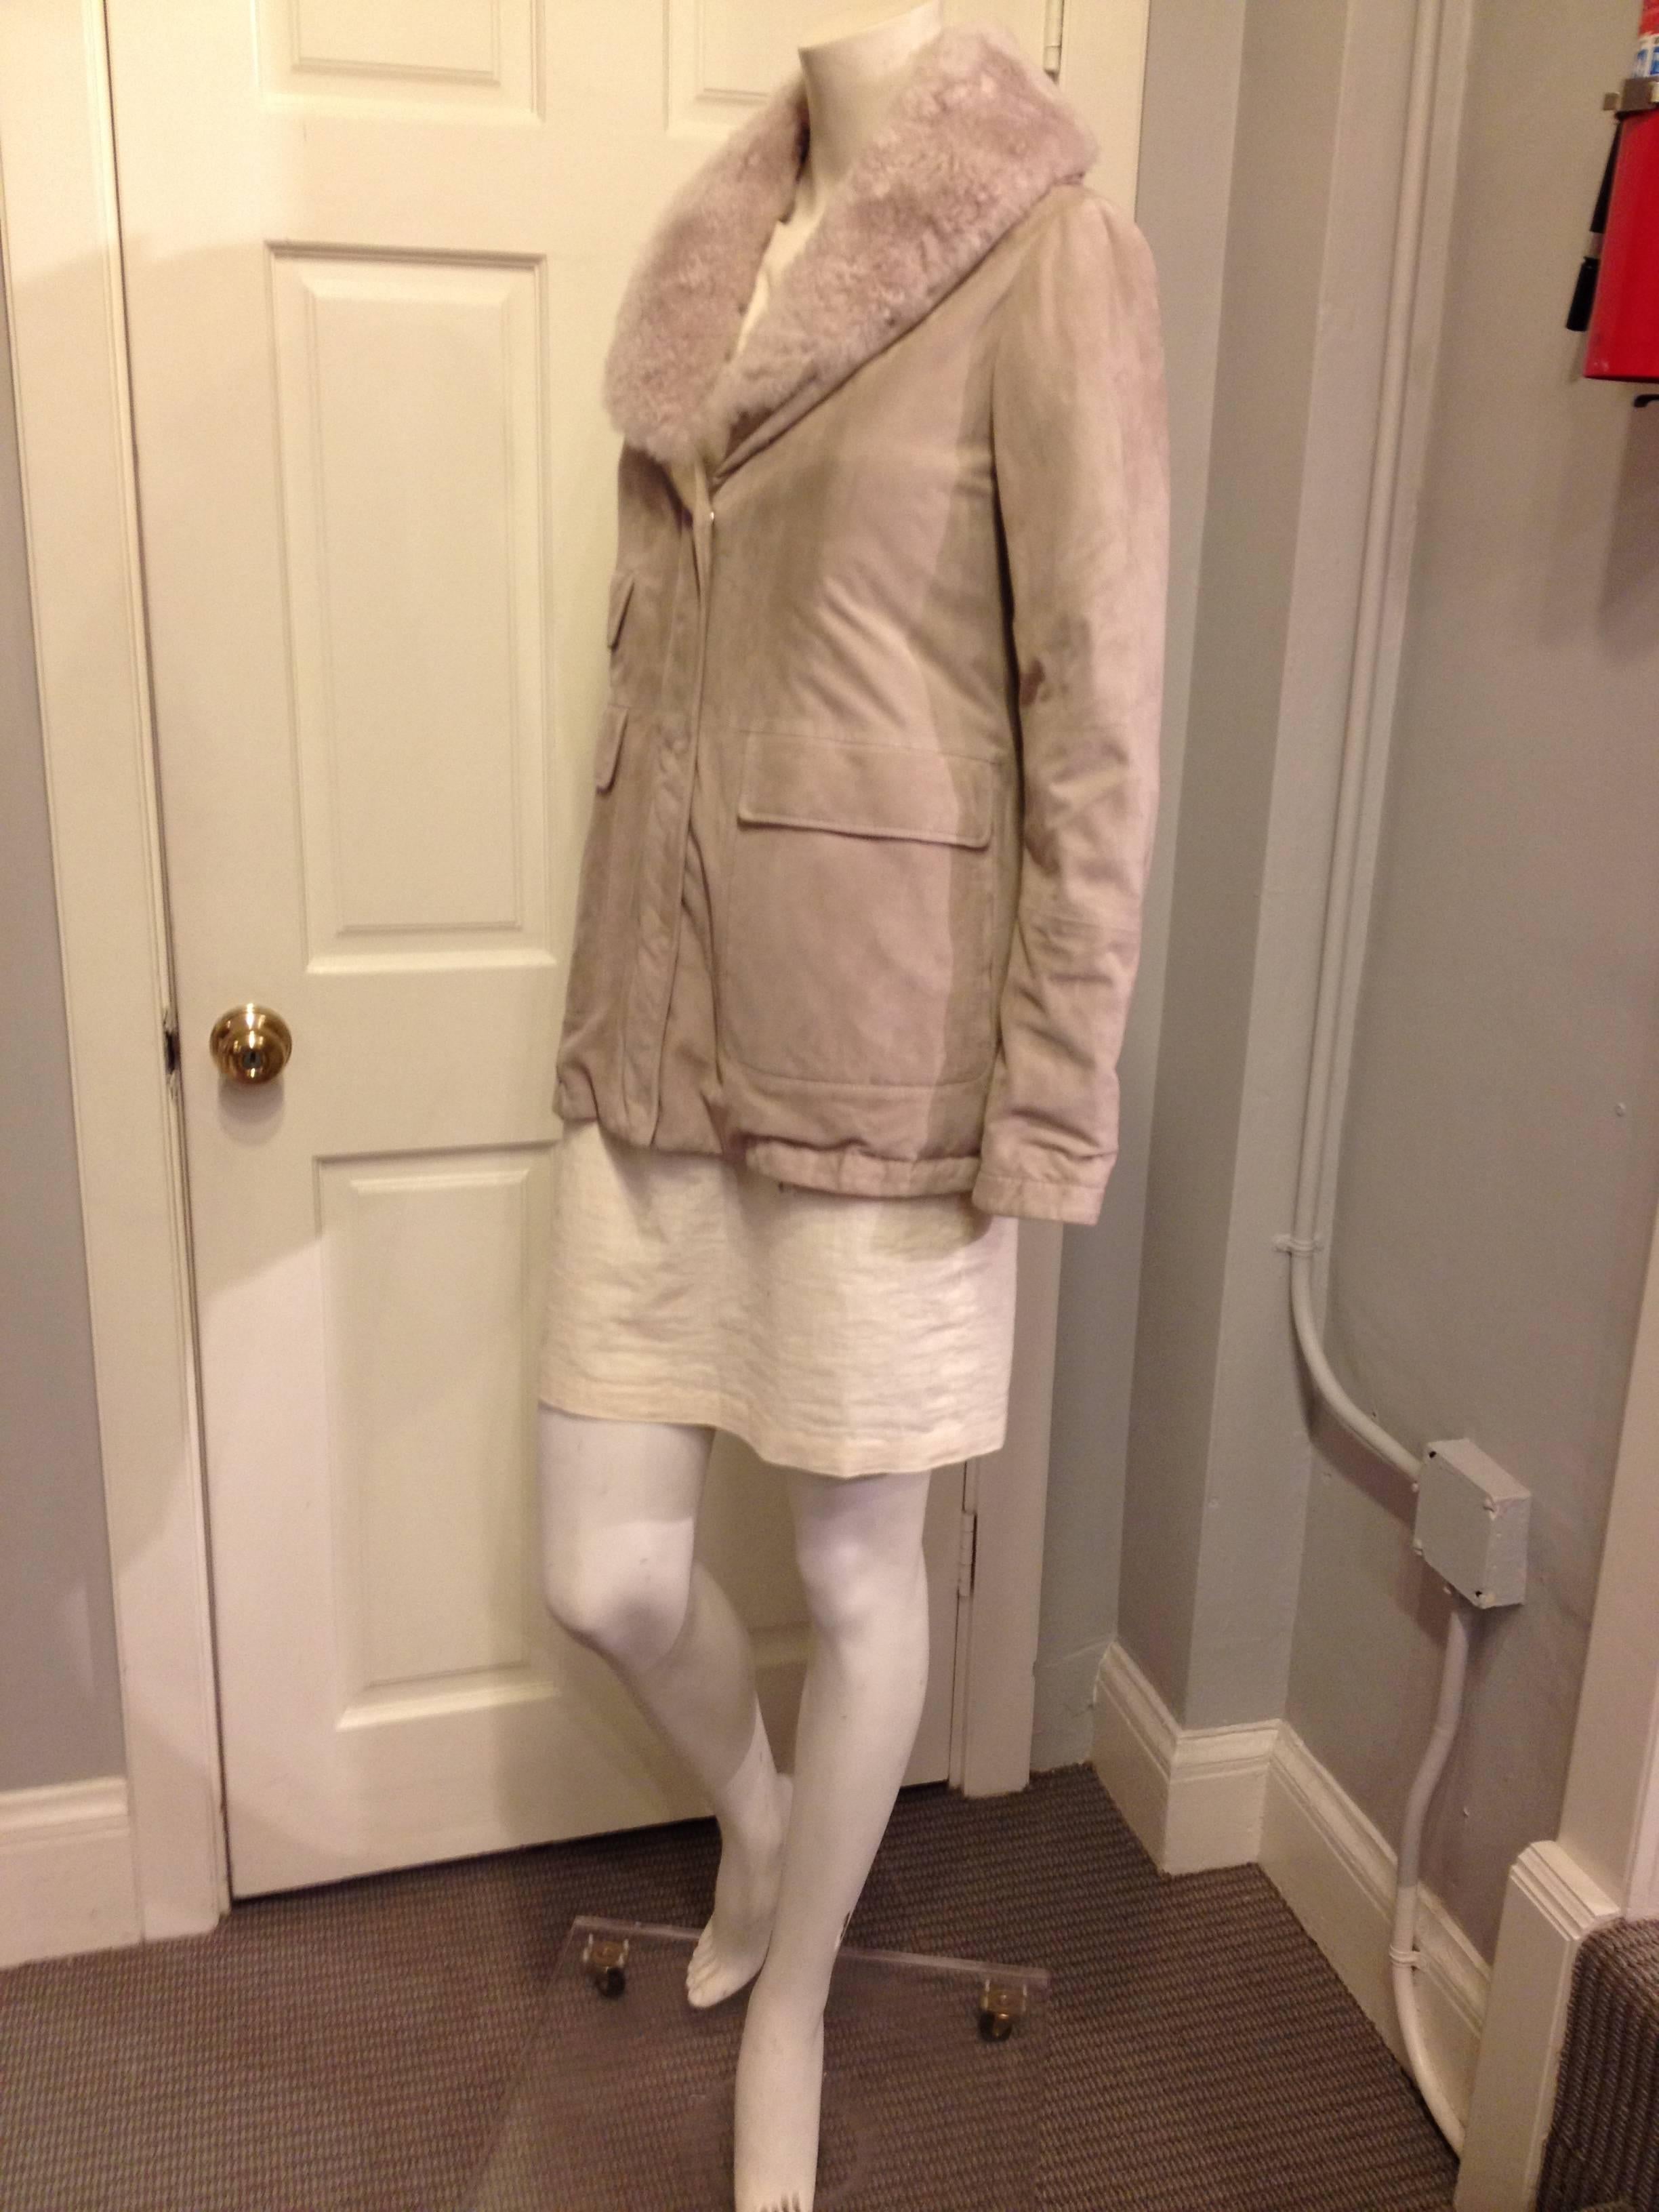 Brunello Cucinelli items are unfailingly items of such pure luxury - they're made from excellent materials, impeccably cut, and styled classically. The beautiful matte bisque suede of this jacket is incredibly dreamily soft and so lightweight, and